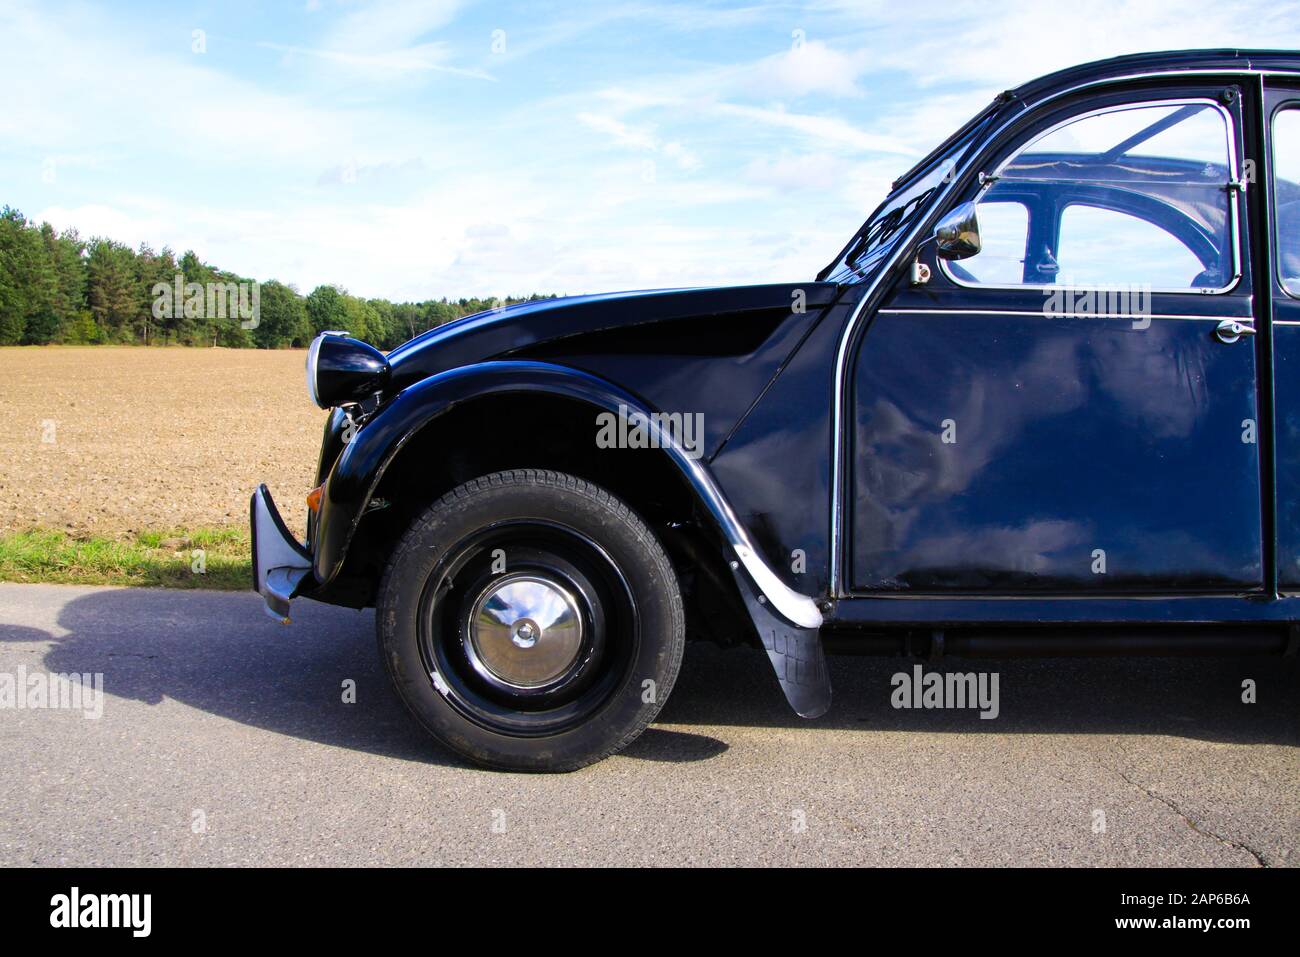 Viersen, Germany - October 12. 2019: Side view on black French classic cult car 2CV with open folding roof against blue sky in rural area Stock Photo